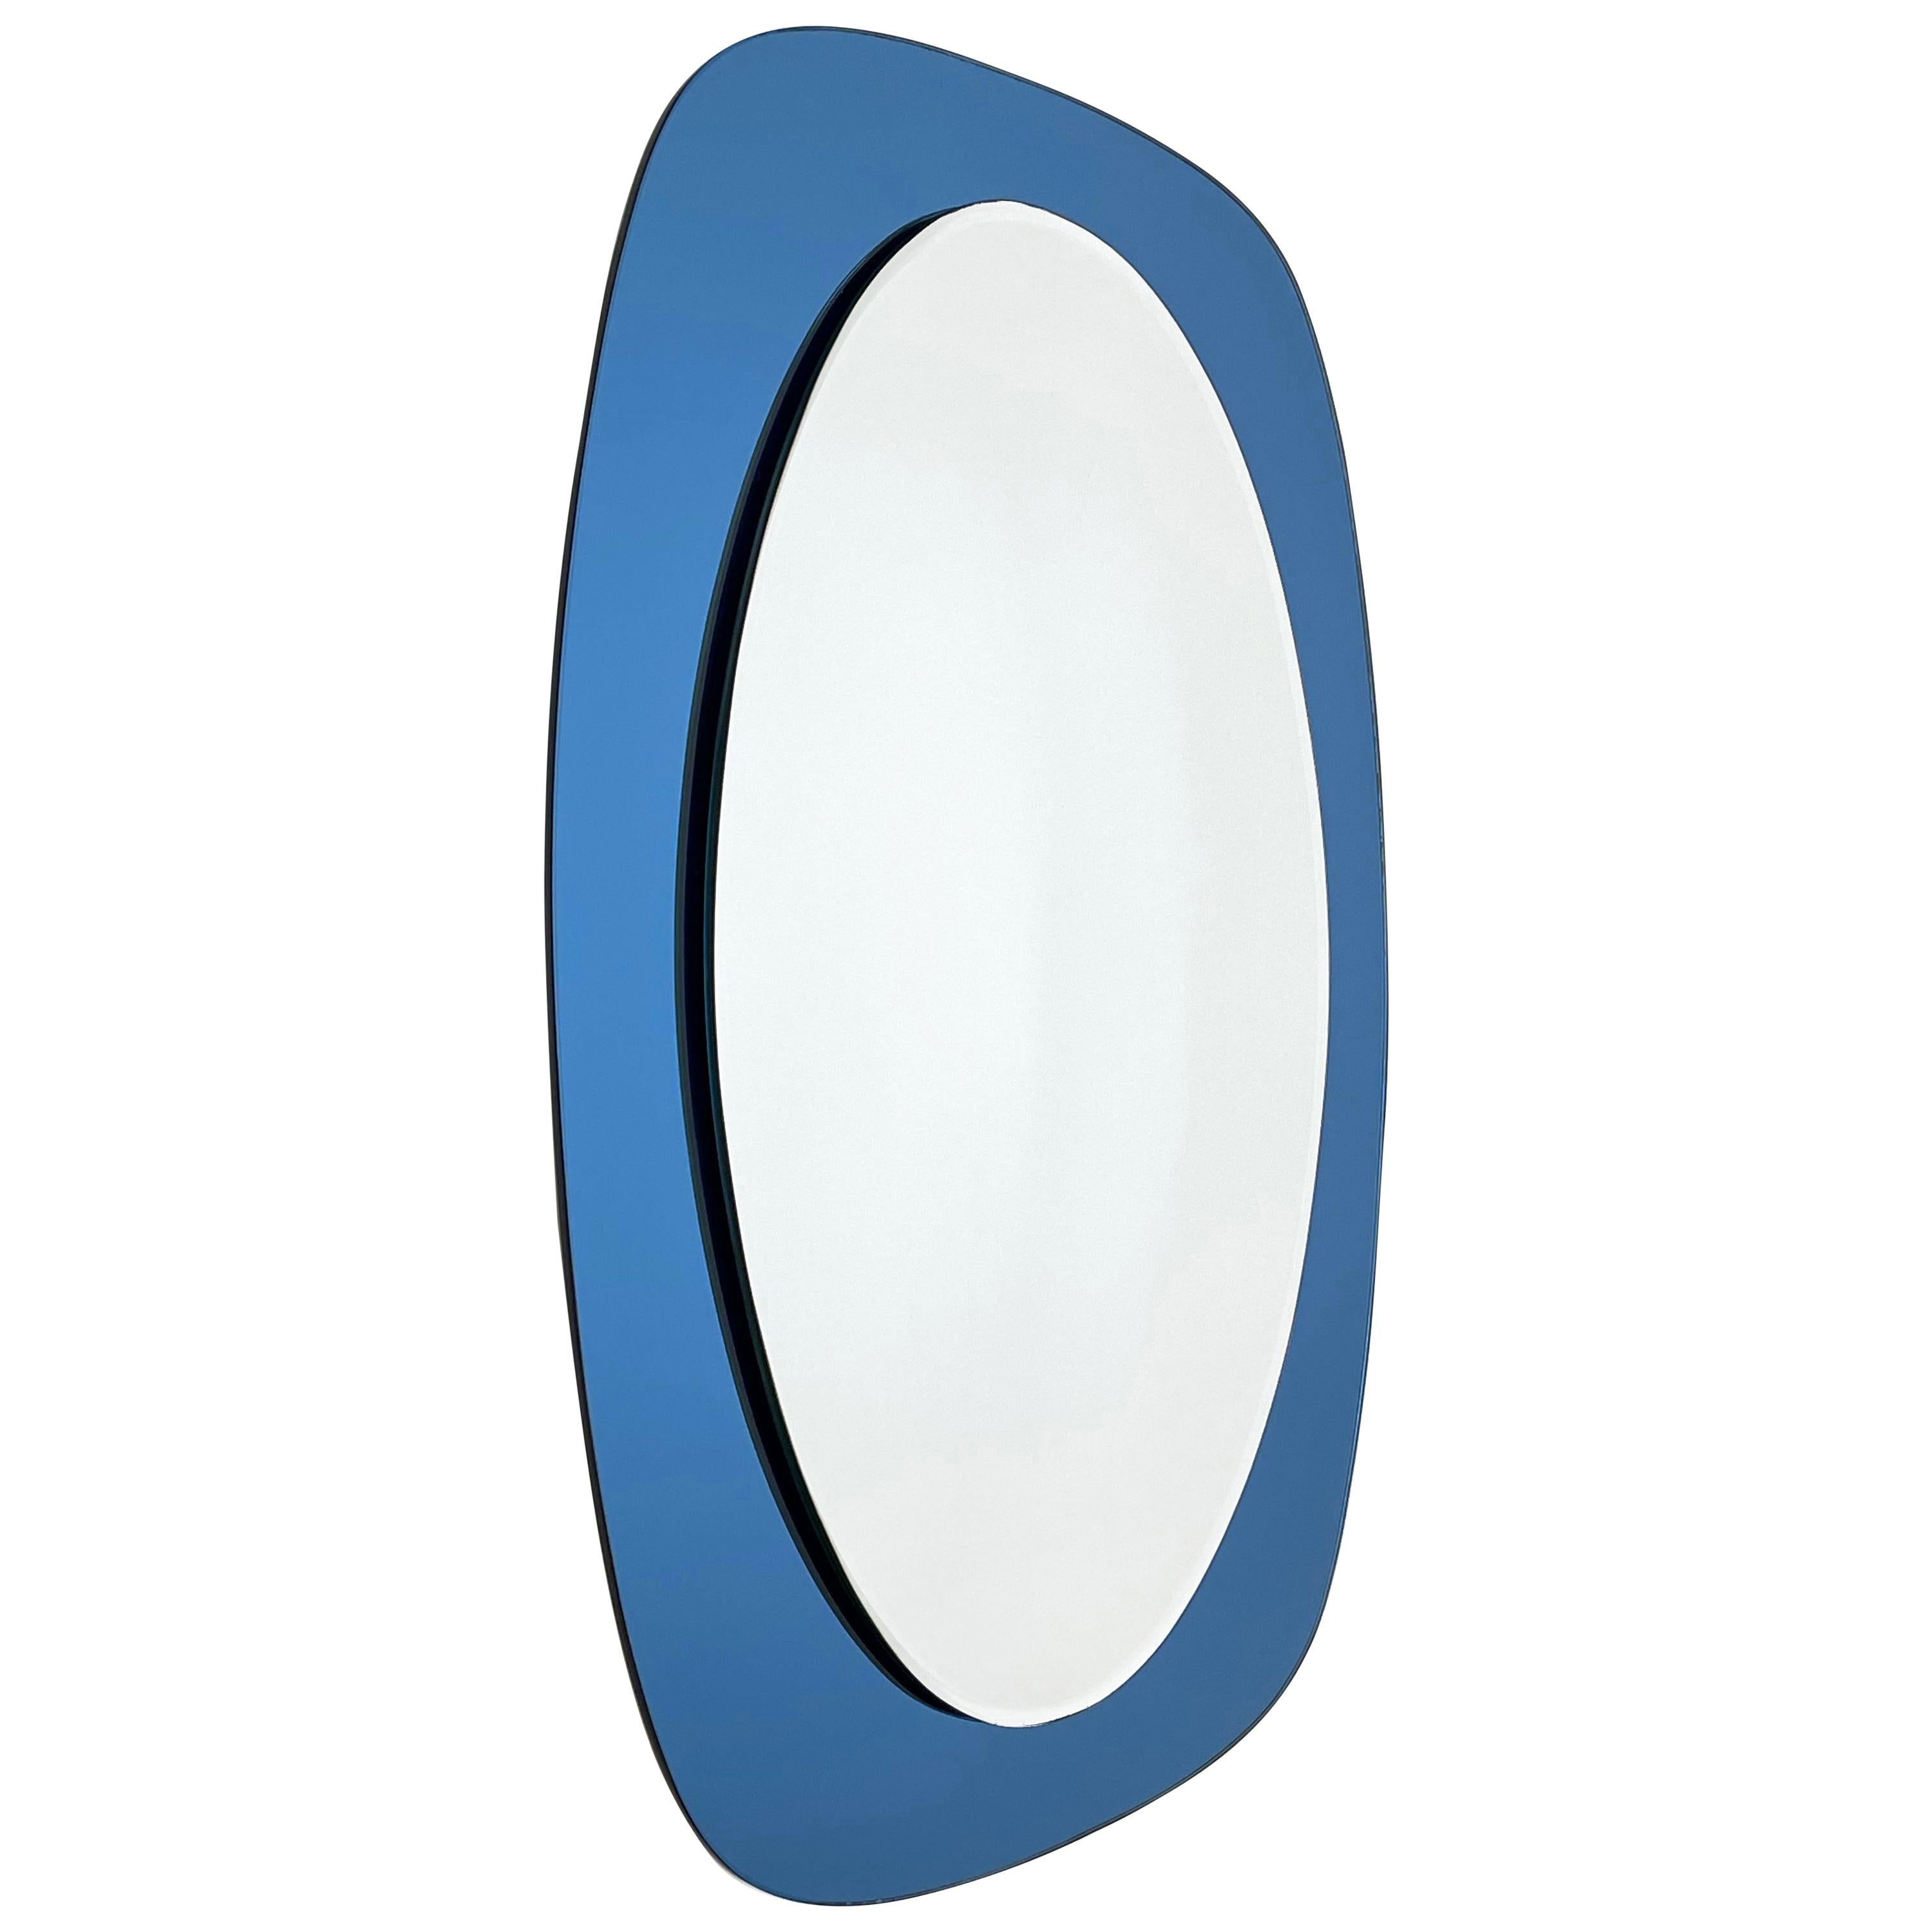 Cristal Art Midcentury Oval Italian Wall Mirror with Blue Glass Frame, 1960s